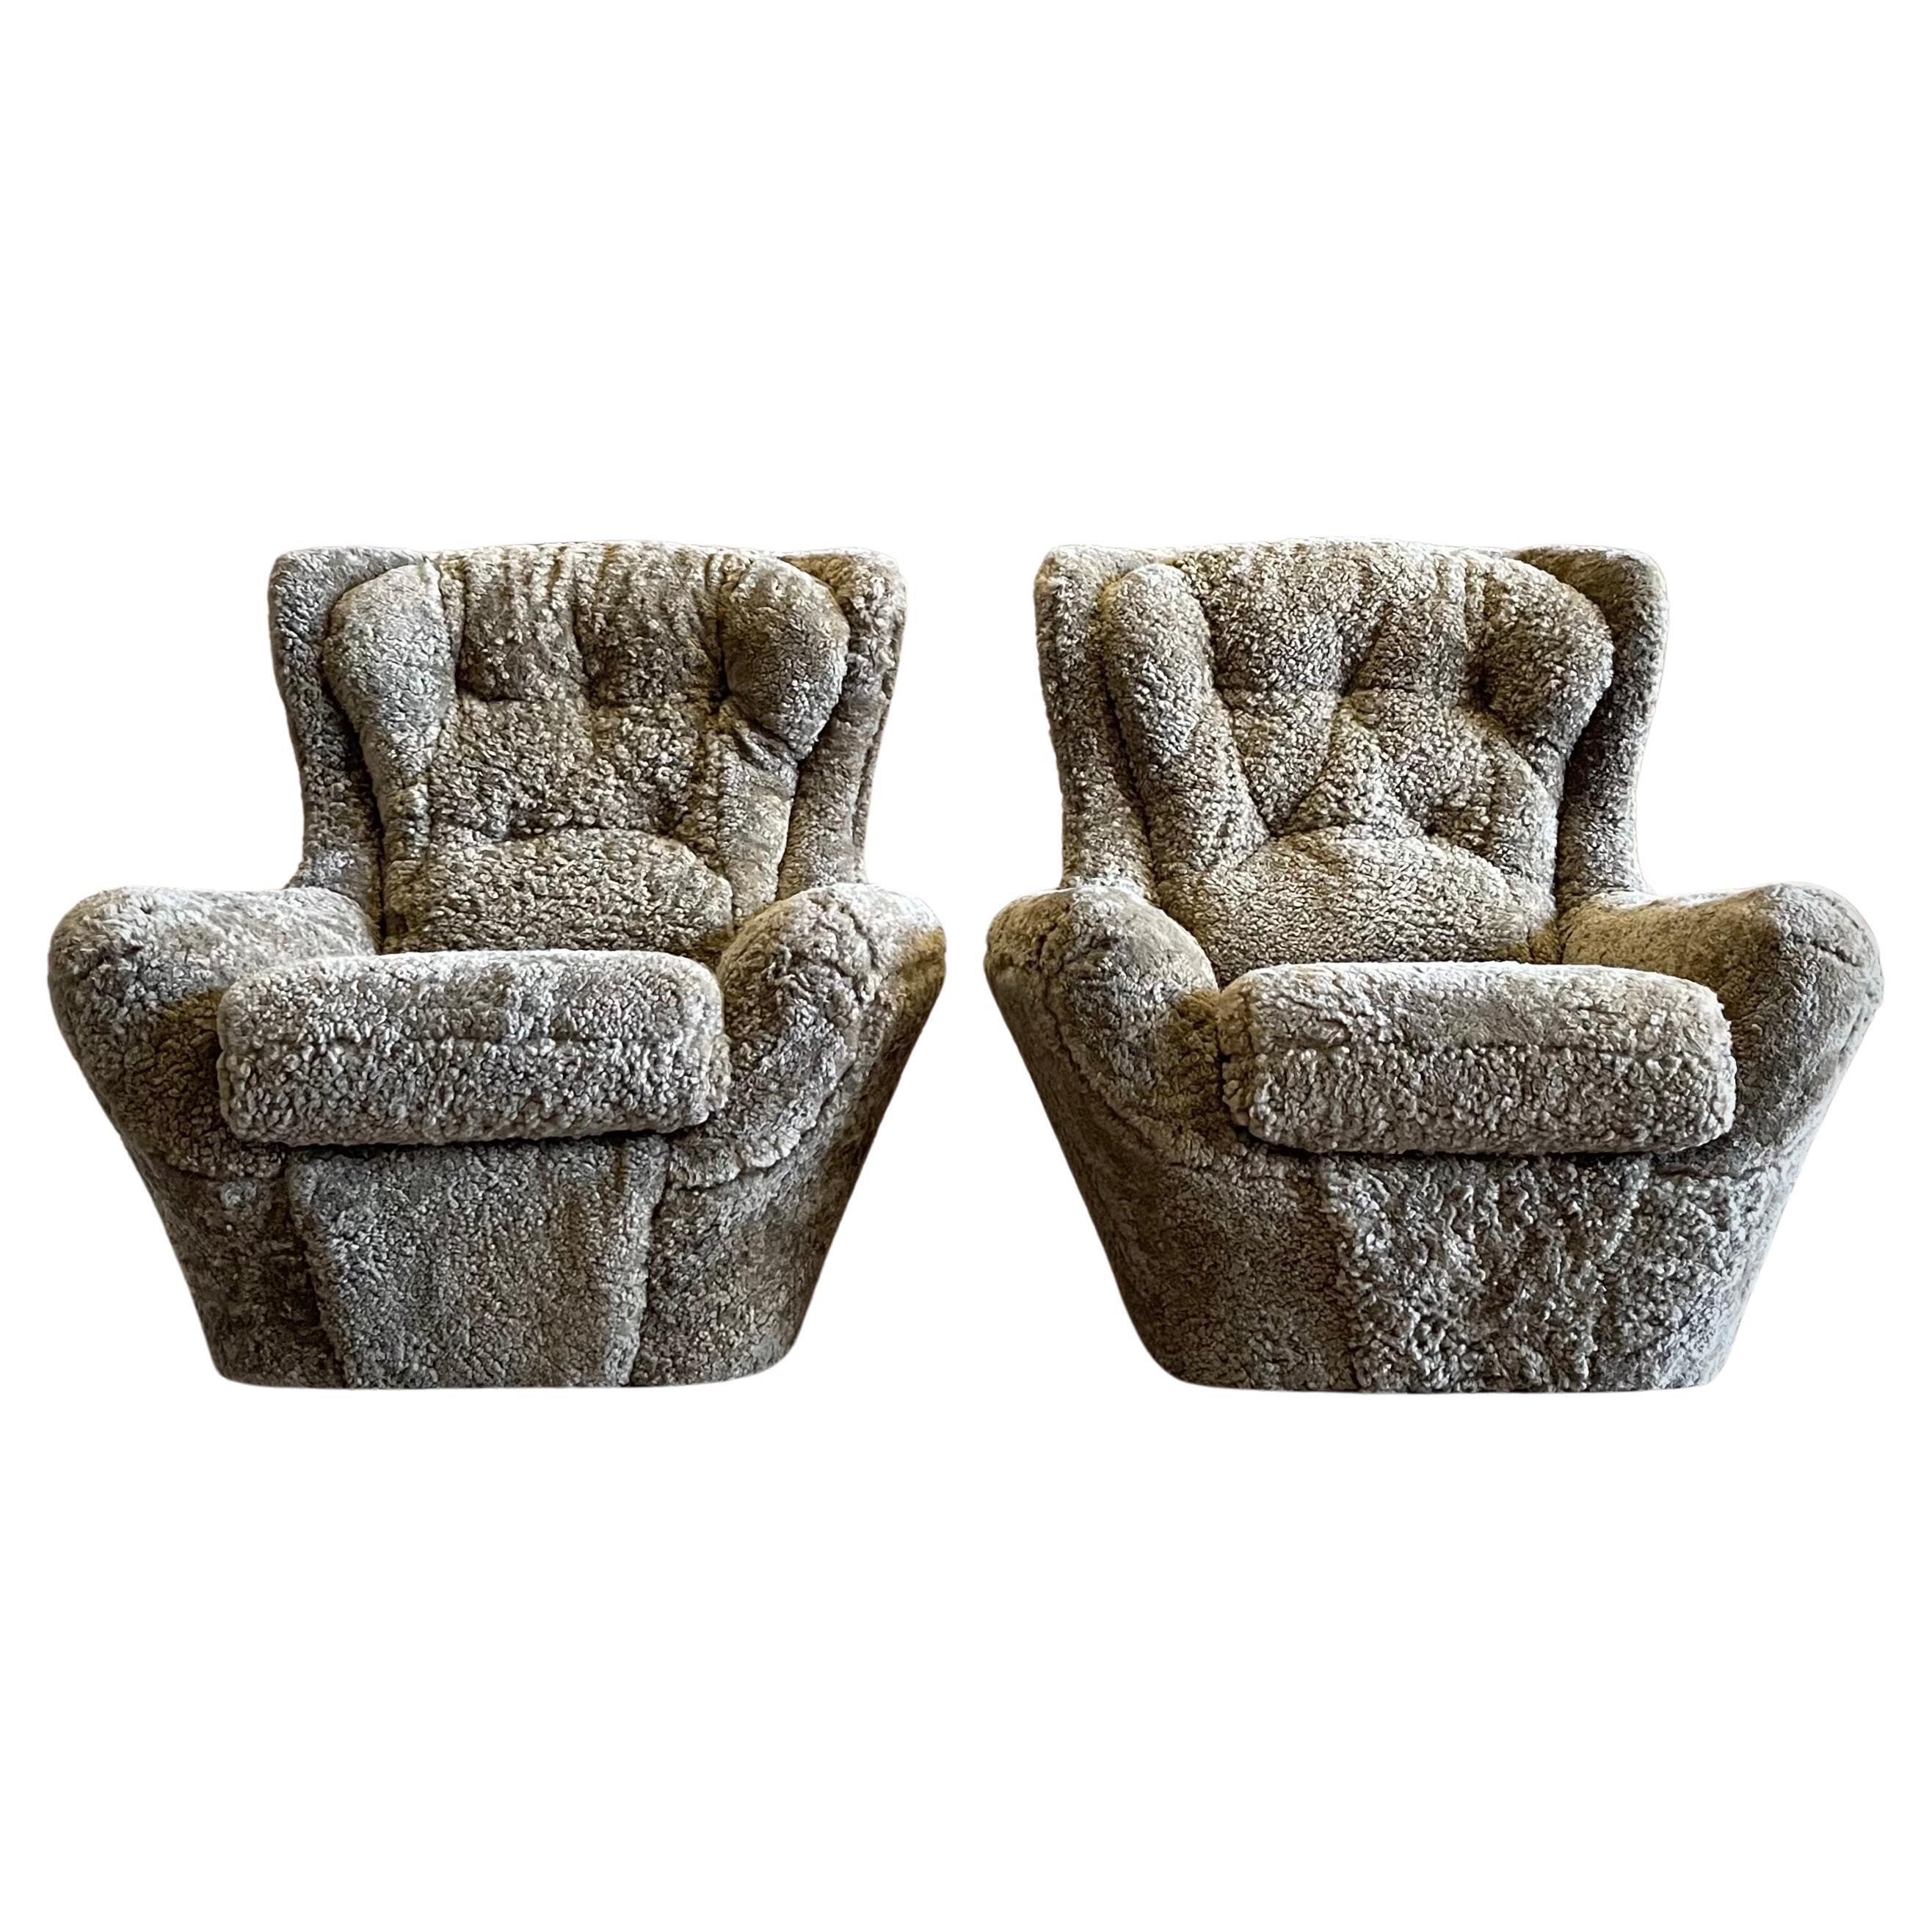 Pair French MCM Steiner Knoll Lounge Chairs in Sheepskin / Shearling For Sale